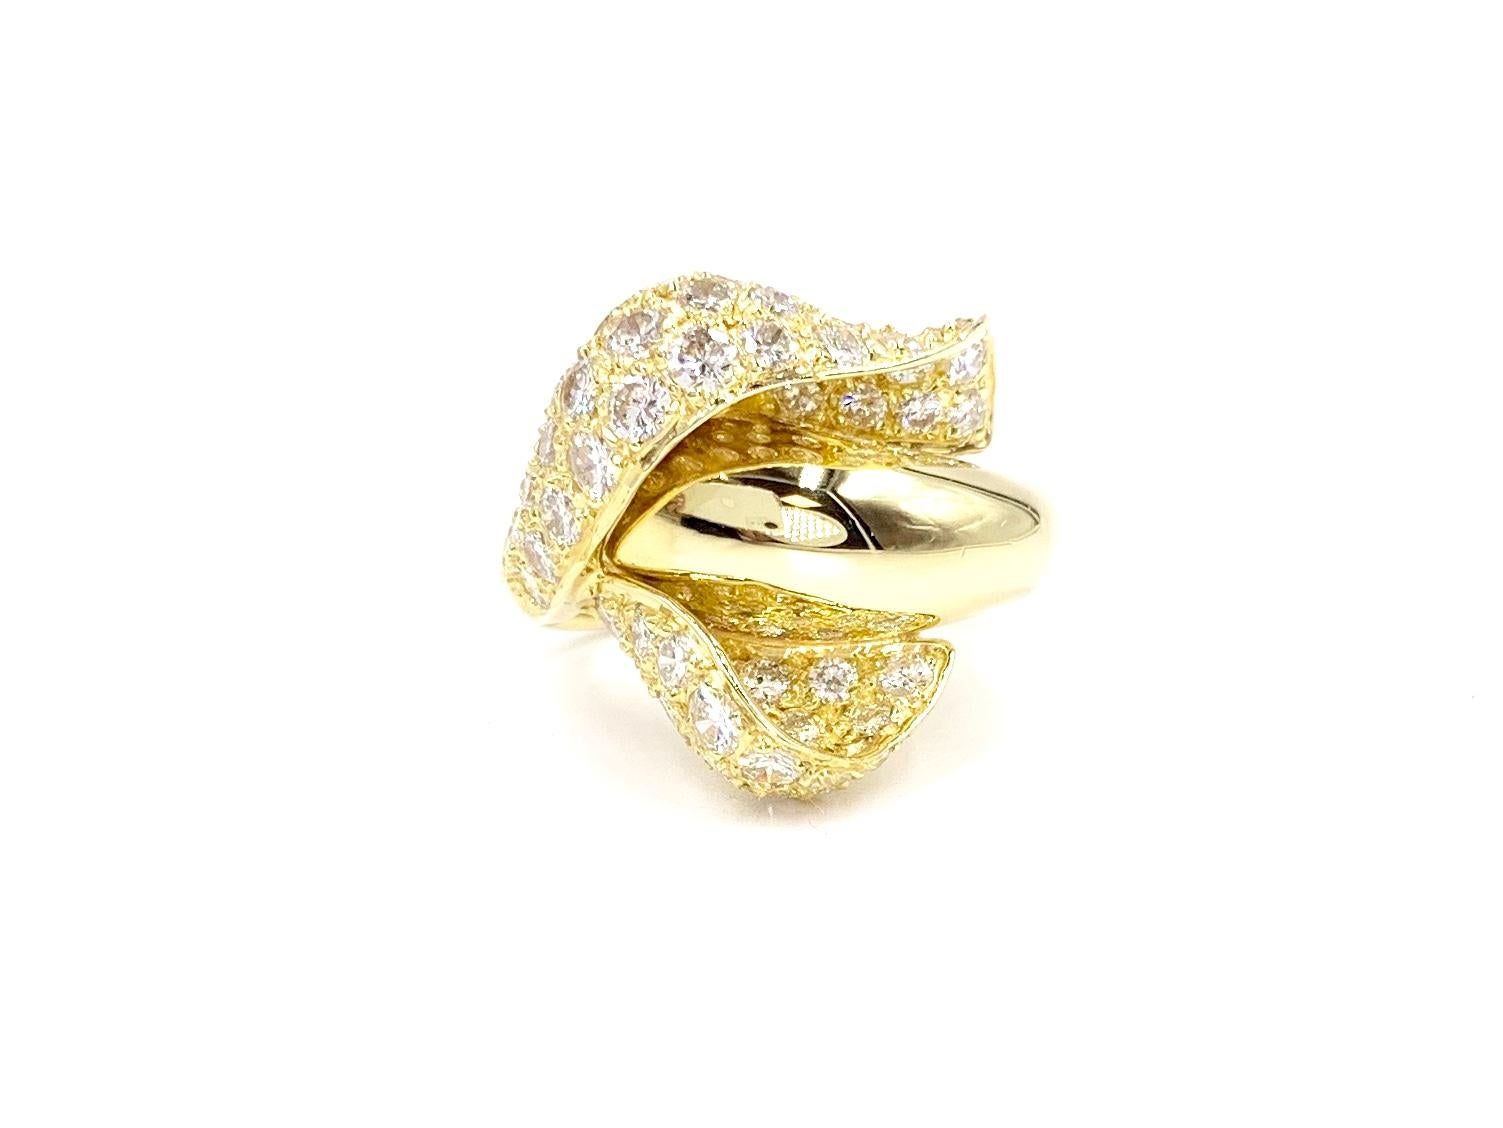 An exquisite Calla Lily flower ring created by expert jeweler, Jose Hess. This 18 karat yellow gold ring is feminine and beautiful with pavé white round brilliant diamonds on the petals with a smooth, polished gold shank as the stem. Ring consists